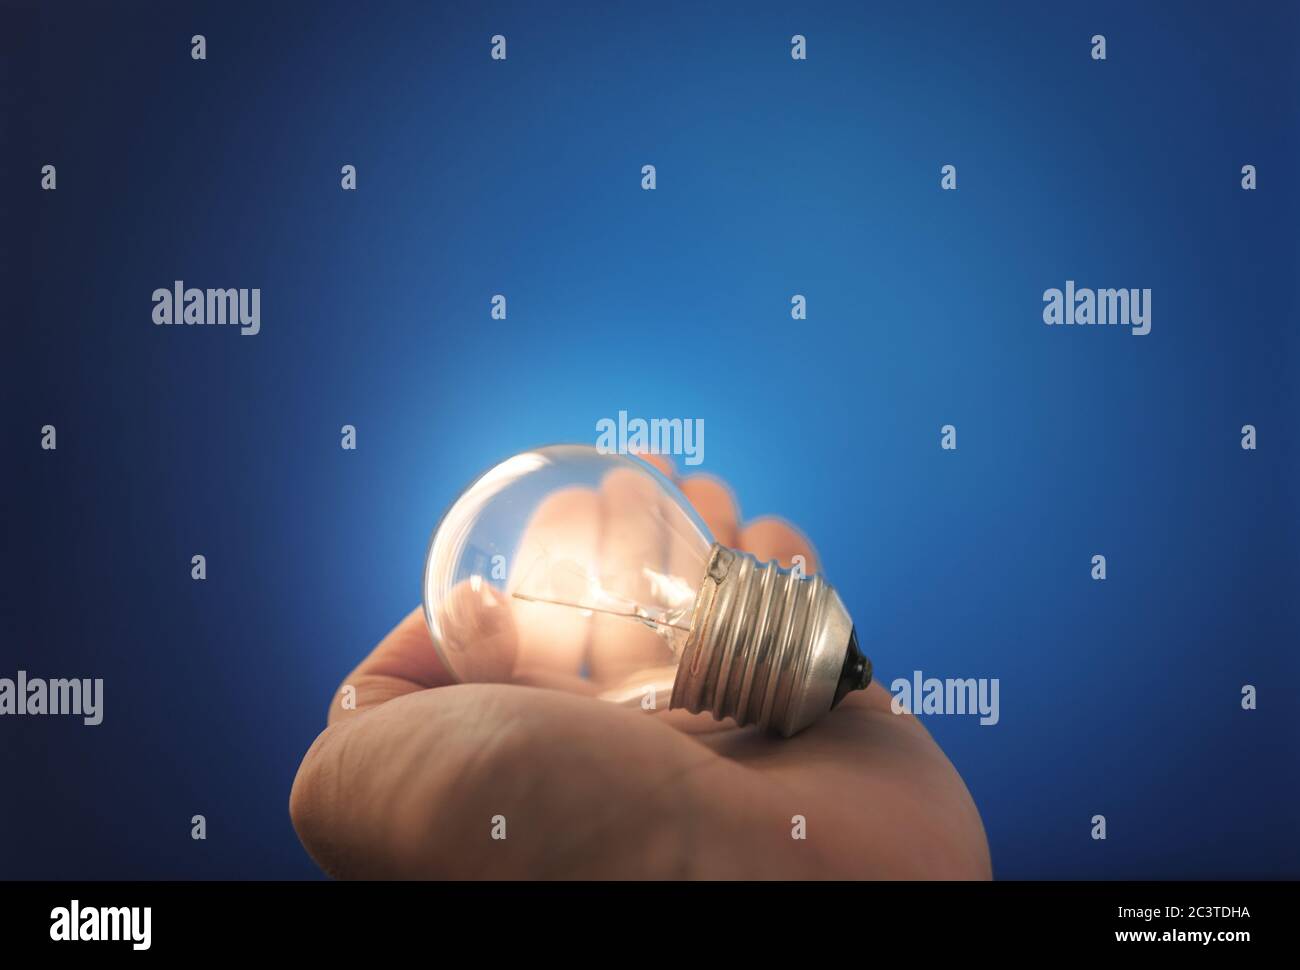 New ideas, innovation and inspiration concept. Glowing light bulb on hand Stock Photo